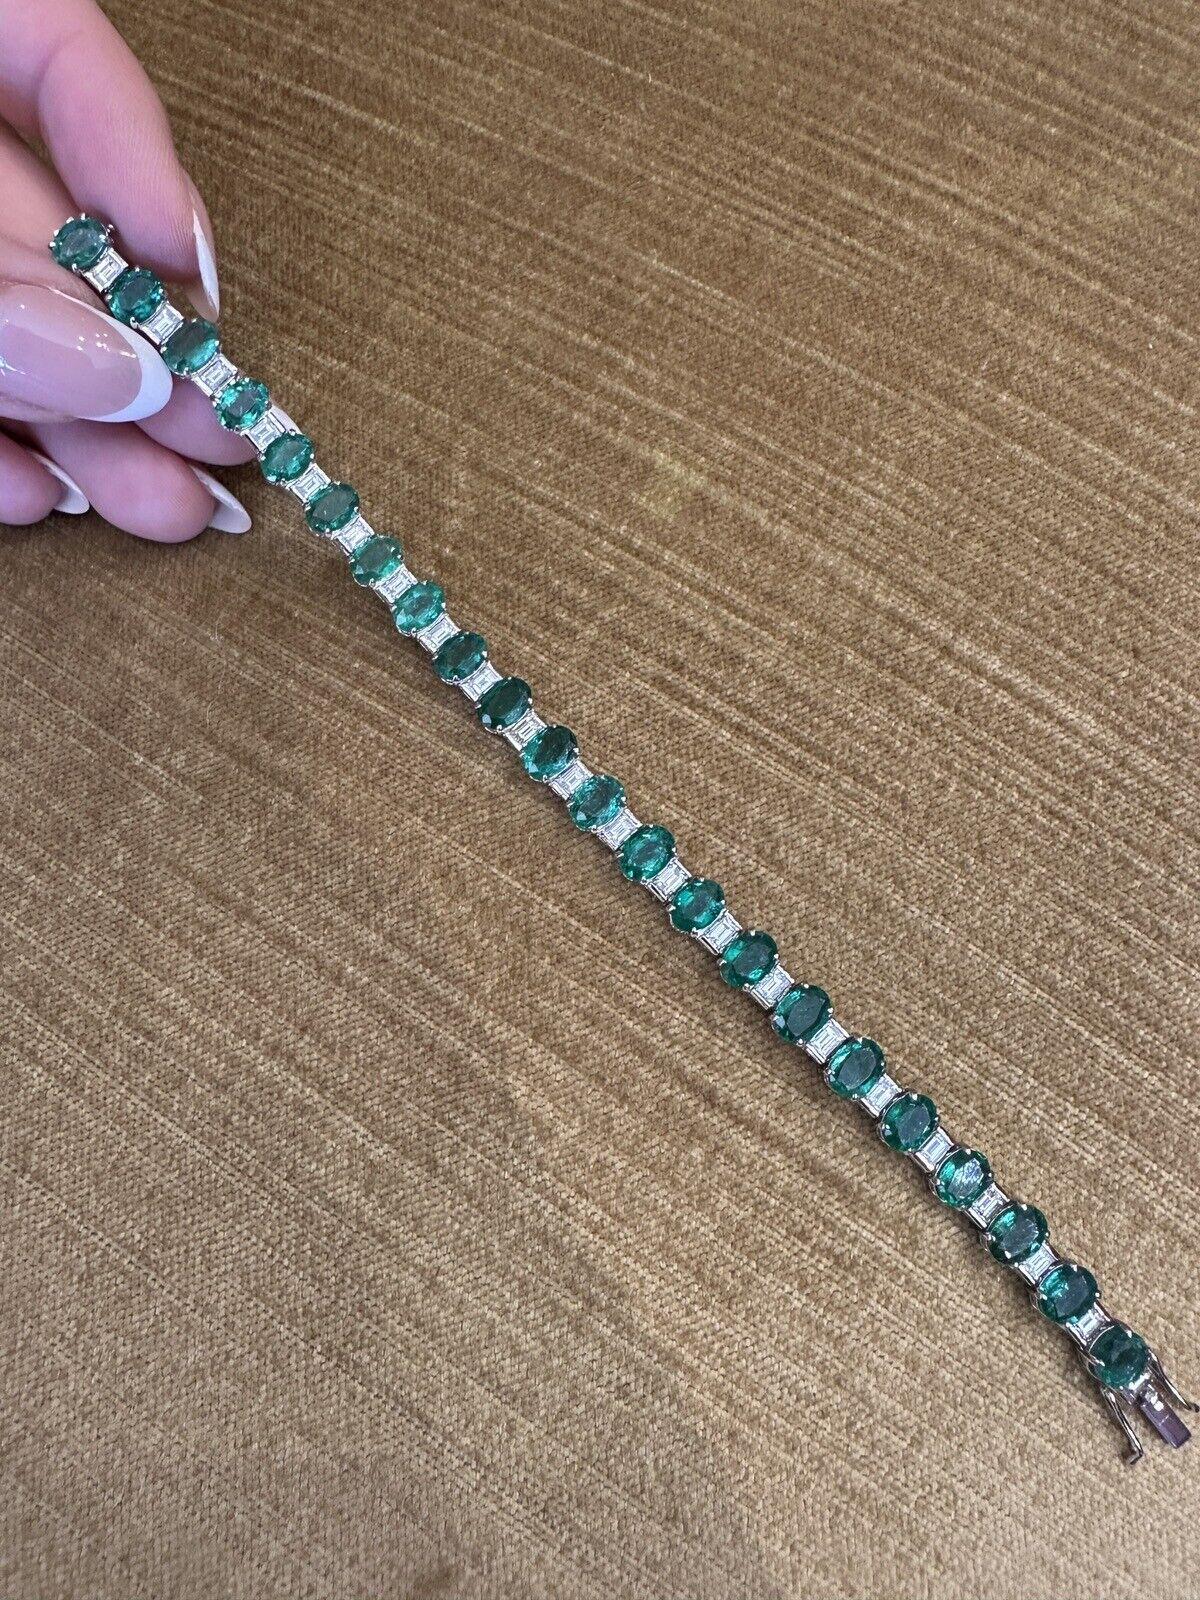 Oval Emerald & Diamond Line Bracelet 19.80 Carat Total Weight in 18k White Gold 

Emerald and Diamond Bracelet features 22 lively green Oval Natural Emeralds with 22 Natural Baguette Diamonds set in 18k White Gold. Bracelet is secured by a tongue